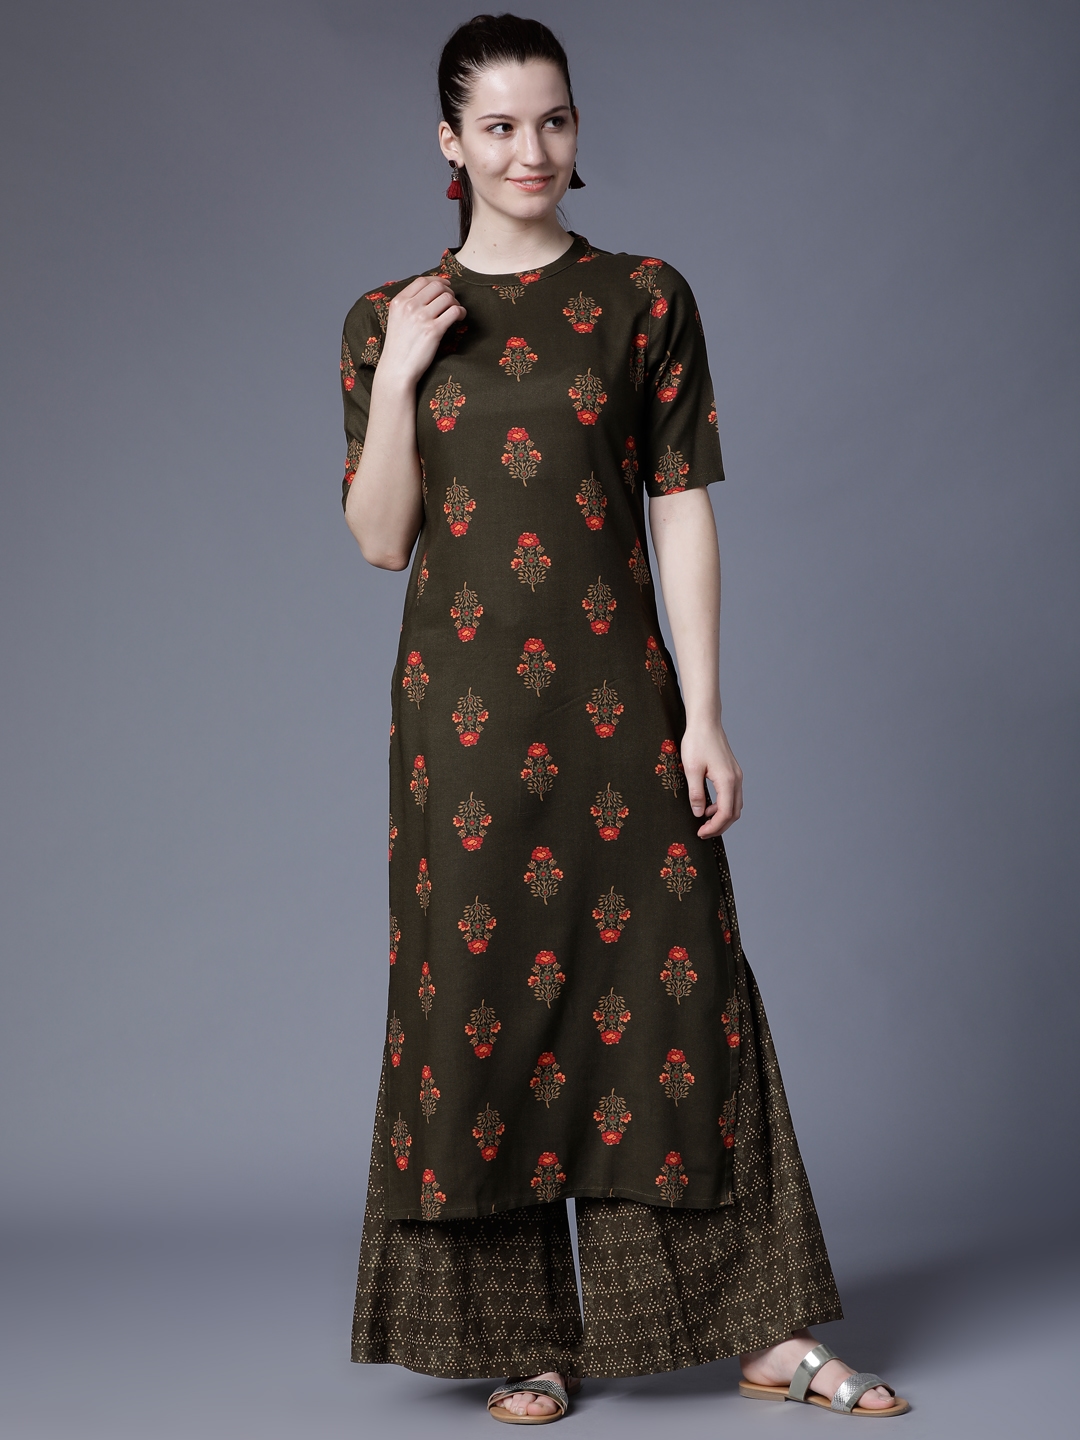 Plazo Suit  Buy Plazo Suits Online at Myntra